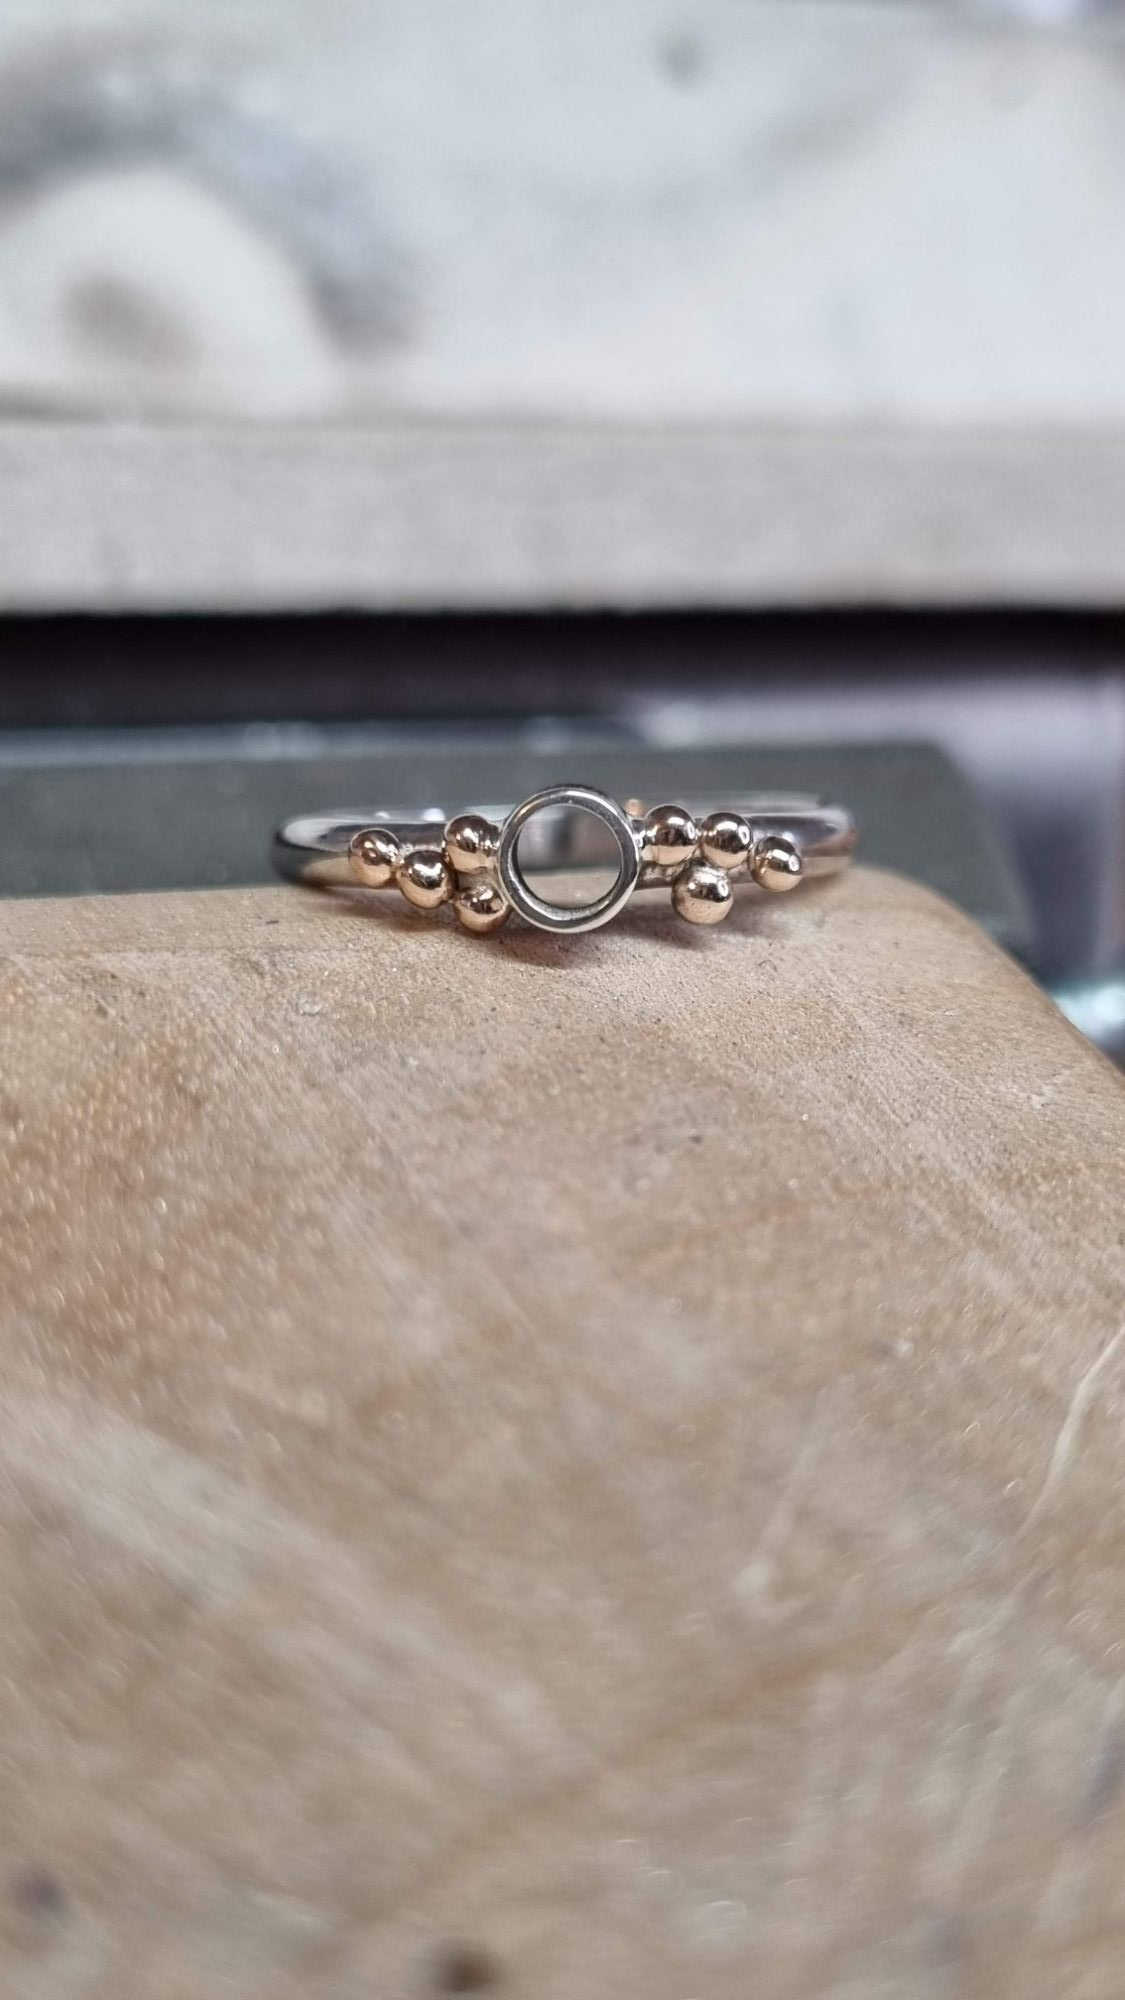 Work in progress of a silver and gold granulation ring 